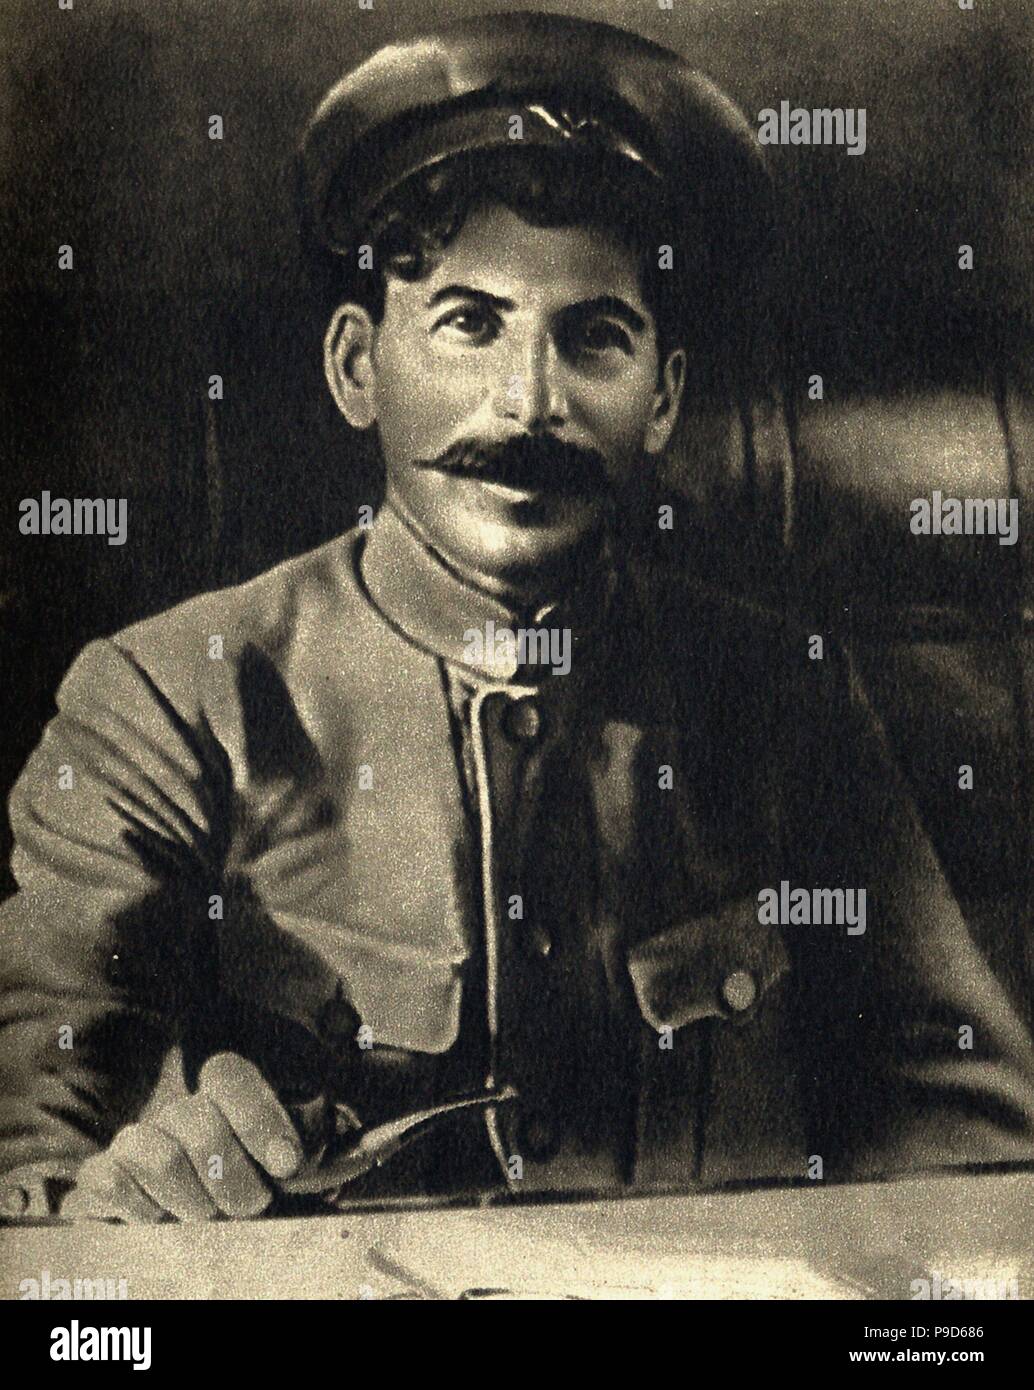 Joseph Stalin on the Southern Front in Tsaritsyn. Museum: State History Museum, Moscow. Stock Photo